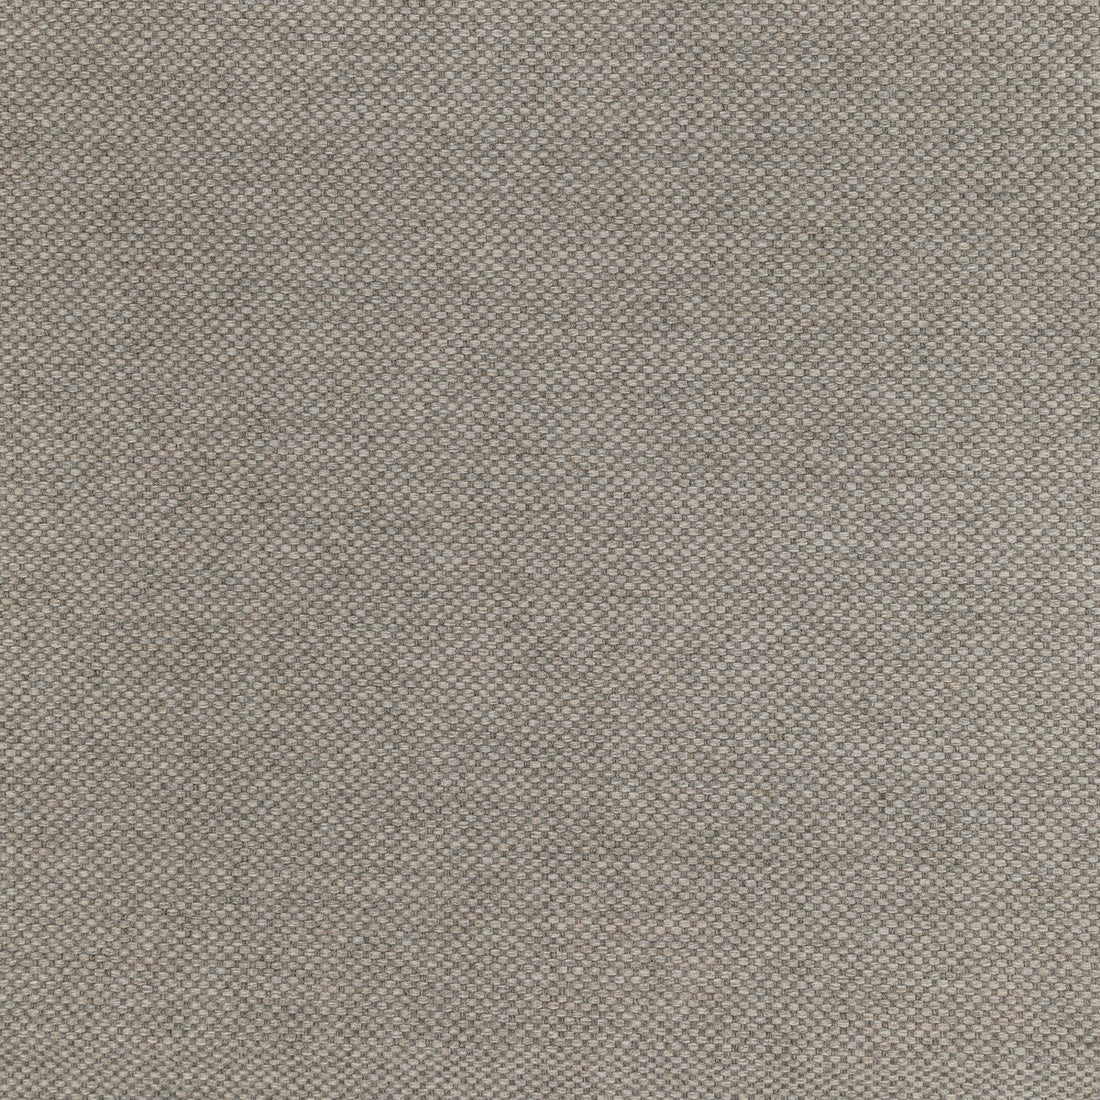 Kravet Basics fabric in 36826-106 color - pattern 36826.106.0 - by Kravet Basics in the Indoor / Outdoor collection